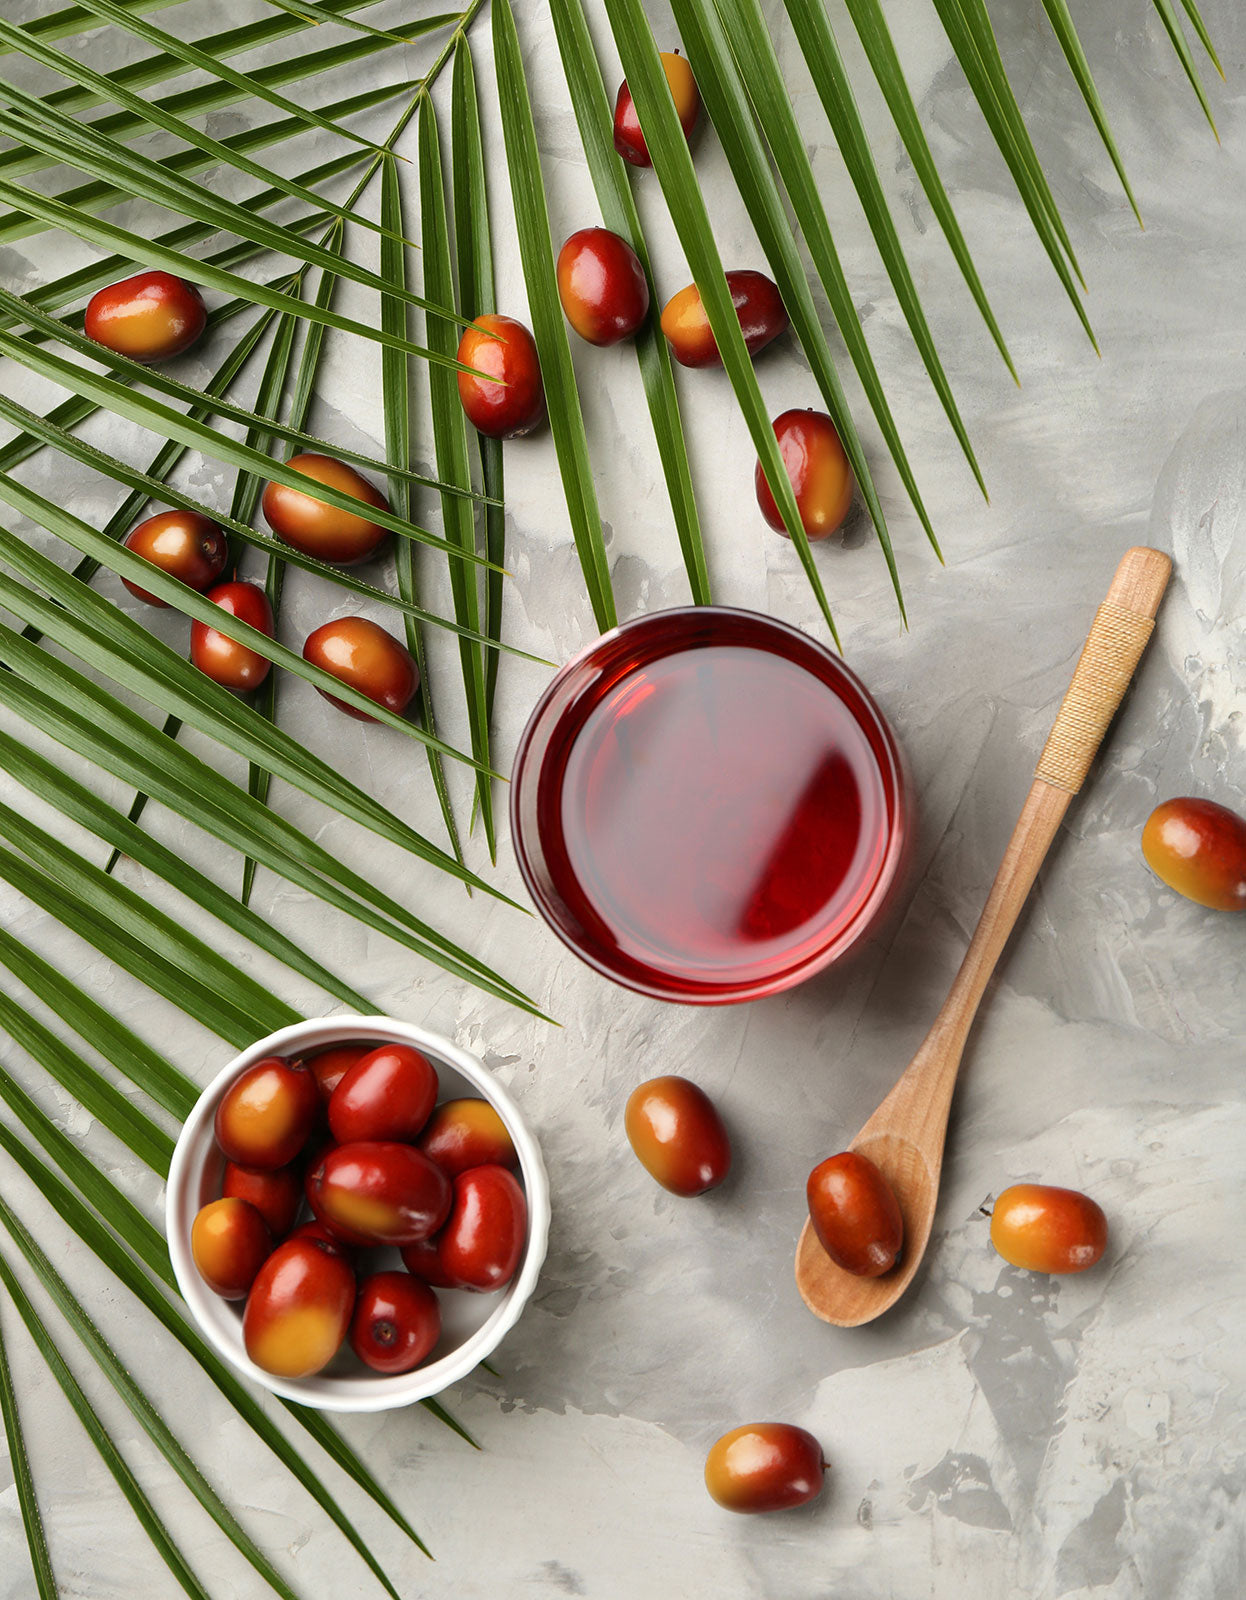 A clear container of red palm oil artfully displayed with palm leaves, a wooden spoon, and palm fruit